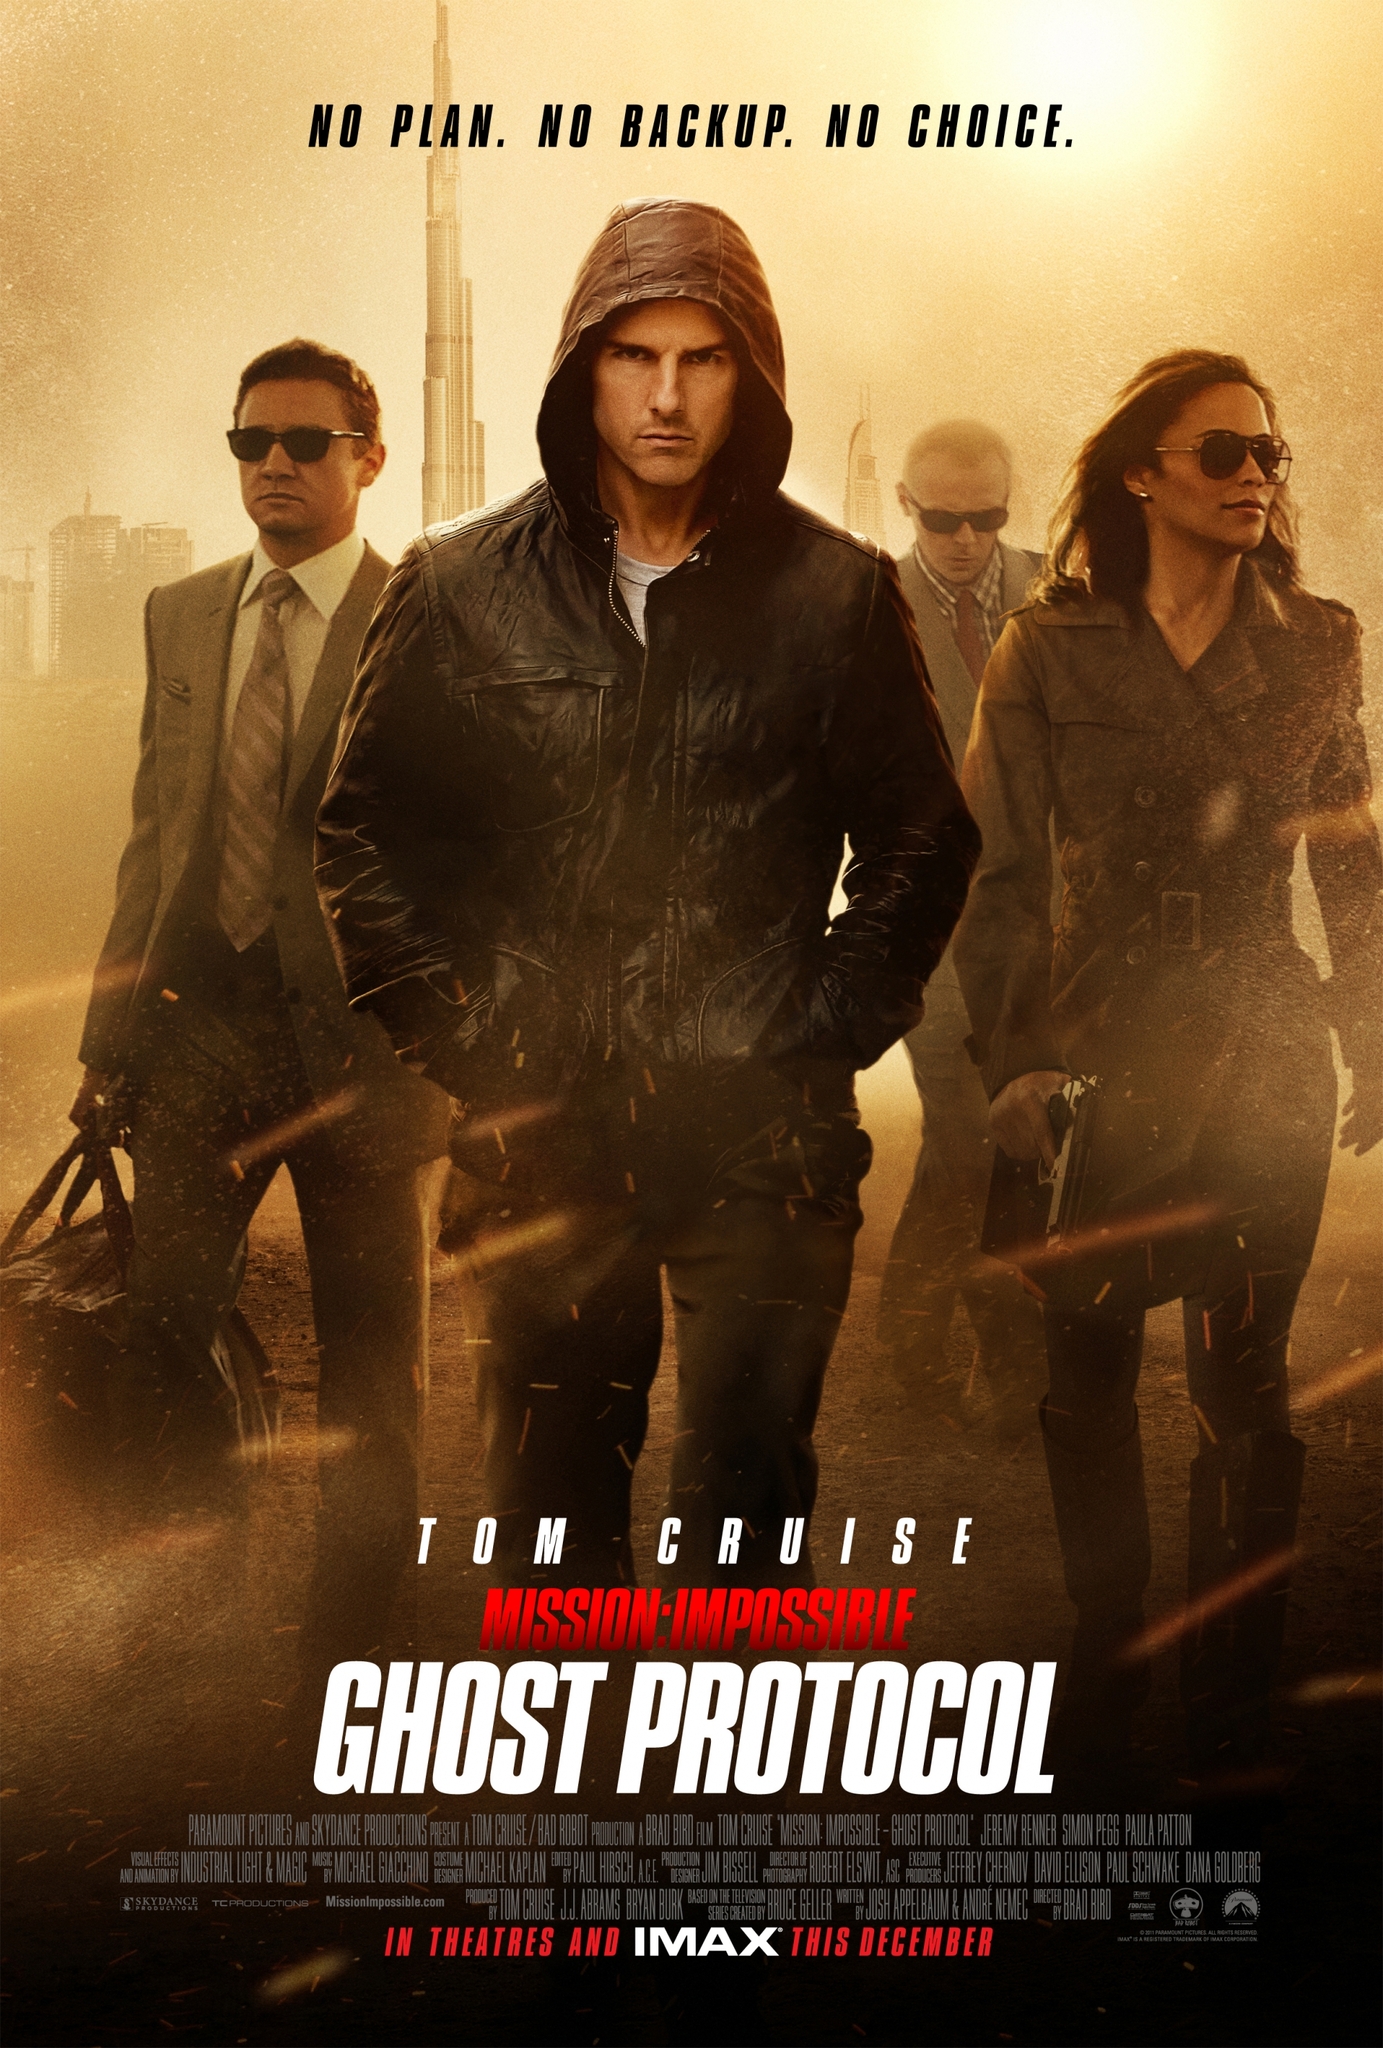 MIssion Impossible 4 Ghost Protocol (2011) ปฎิบัติการไร้เงา Tom Cruise